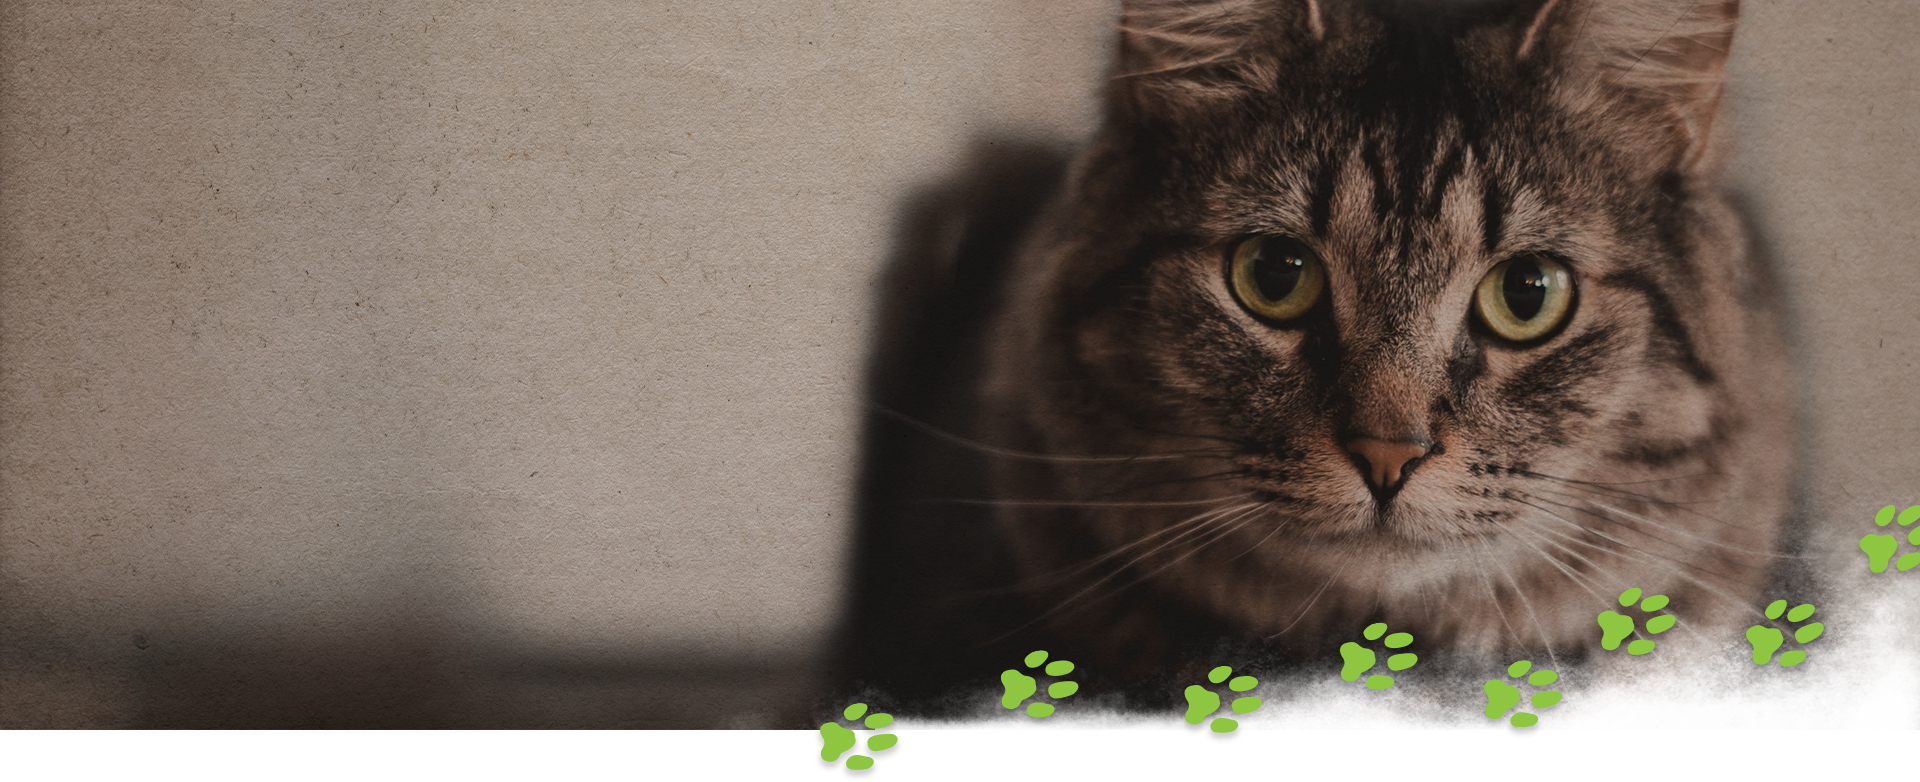 brown tabby cat header image for conservatory cat cafe